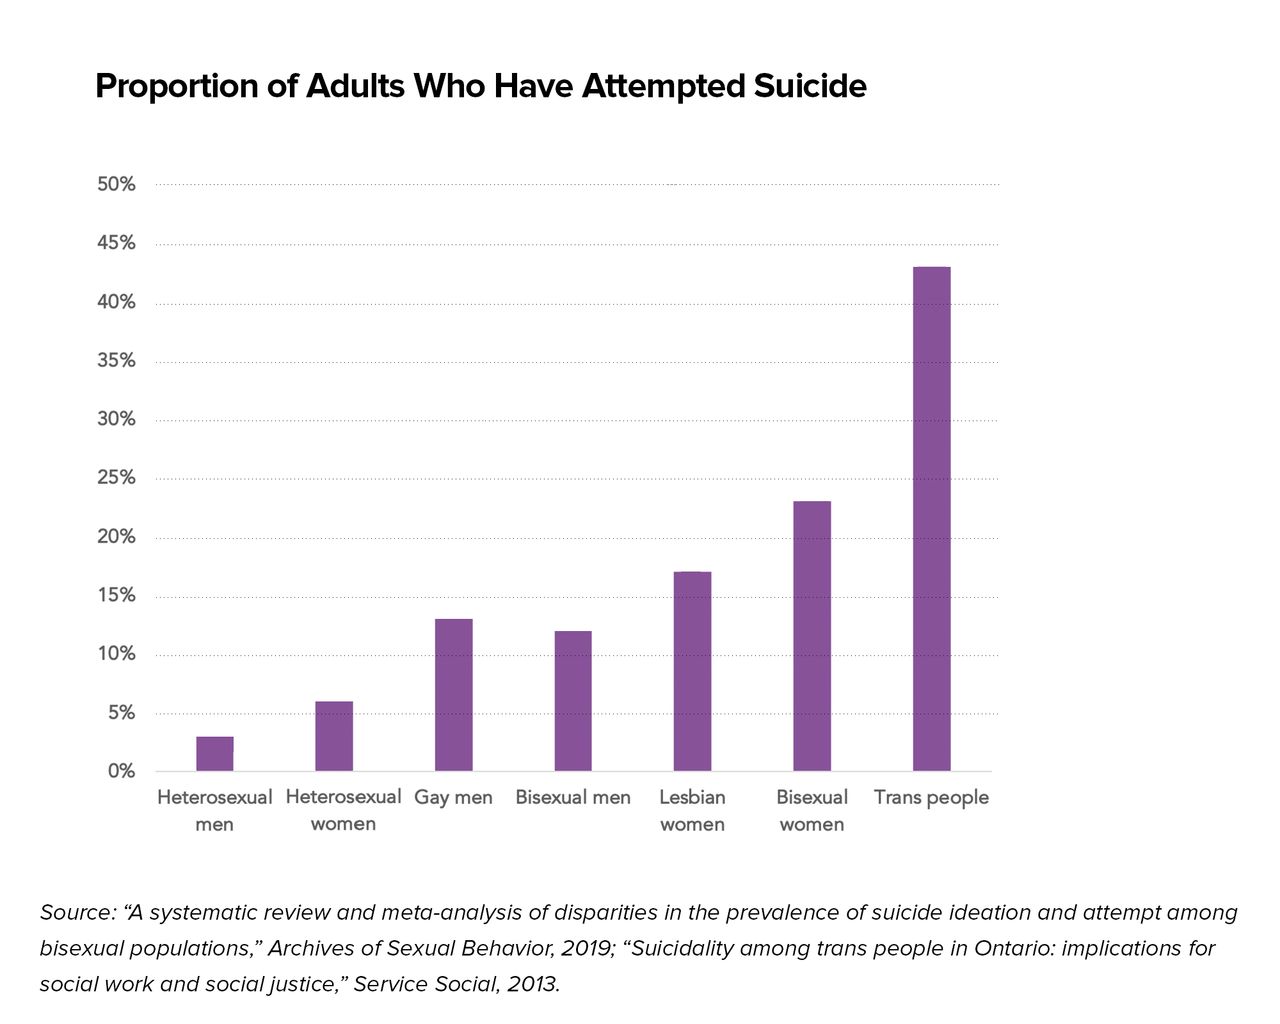 A look at the disparities in suicide rates between straight and LGBT populations. This data is based on a Canadian survey, so the rates may differ slightly for the United States.